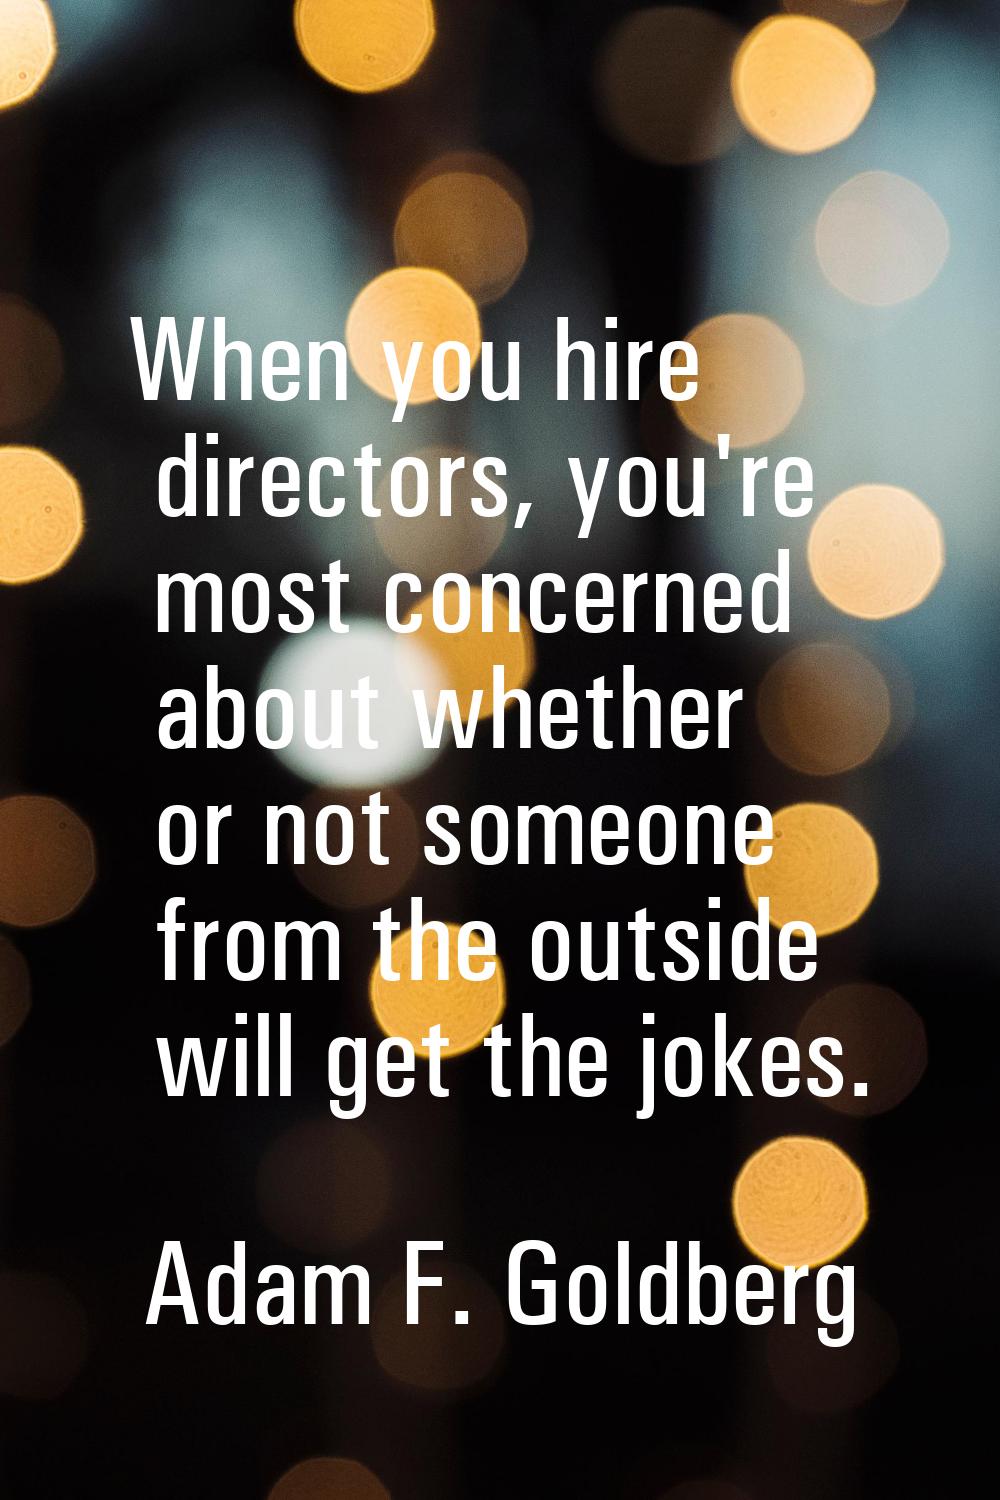 When you hire directors, you're most concerned about whether or not someone from the outside will g